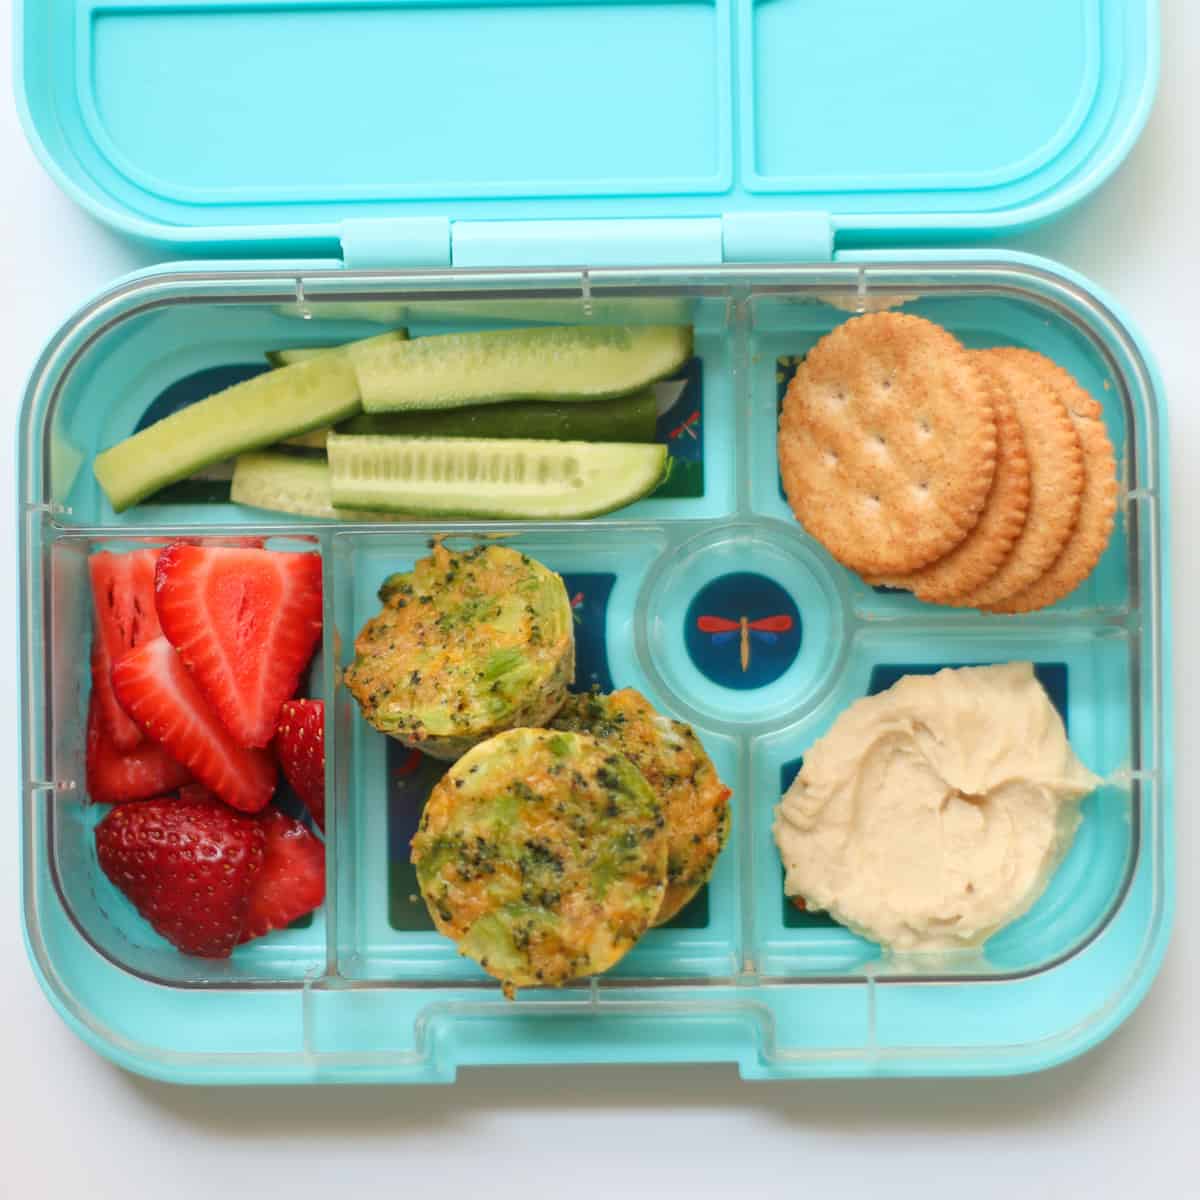 Broccoli bites with crackers, hummus, cucumber, and strawberries.